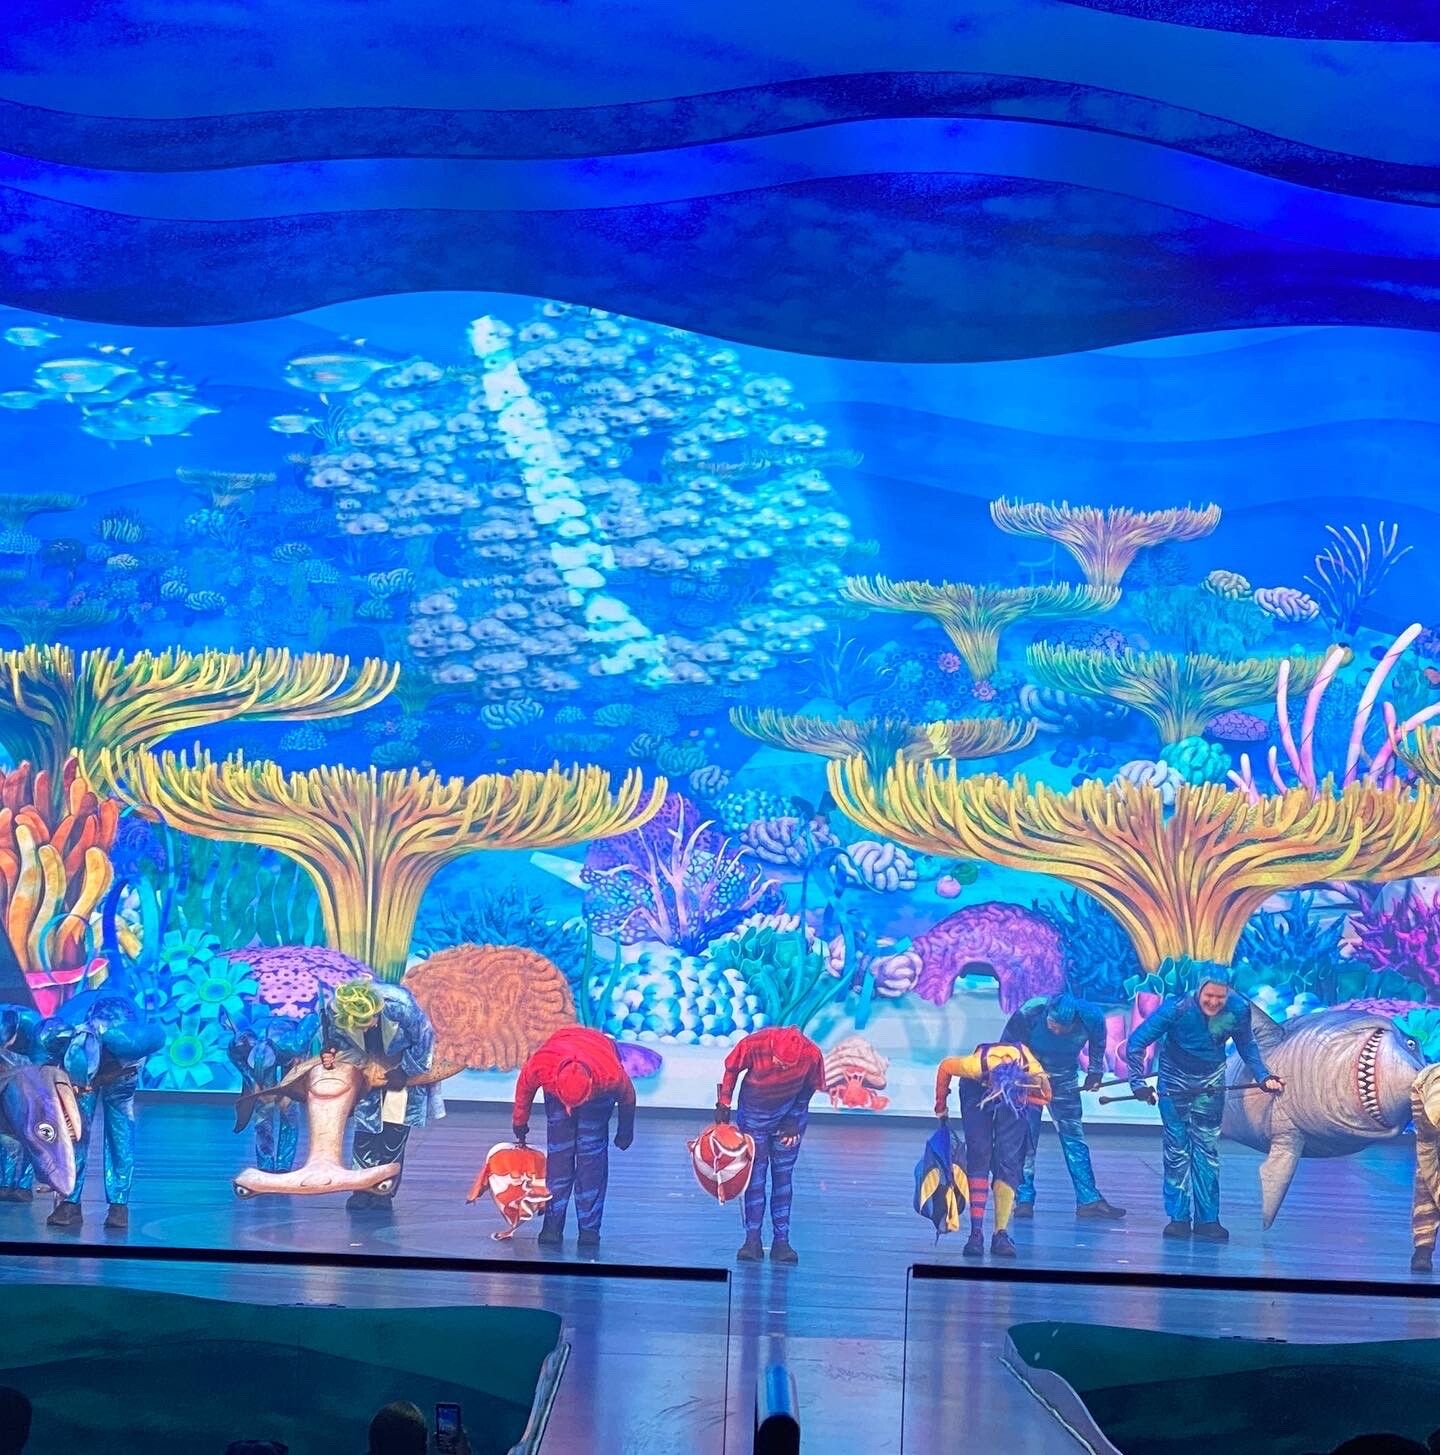 Big Blue in show with performers. Layout by Tony Reser. If you look closely you can see Hermie the Hermit crab bows the same time as the performers!